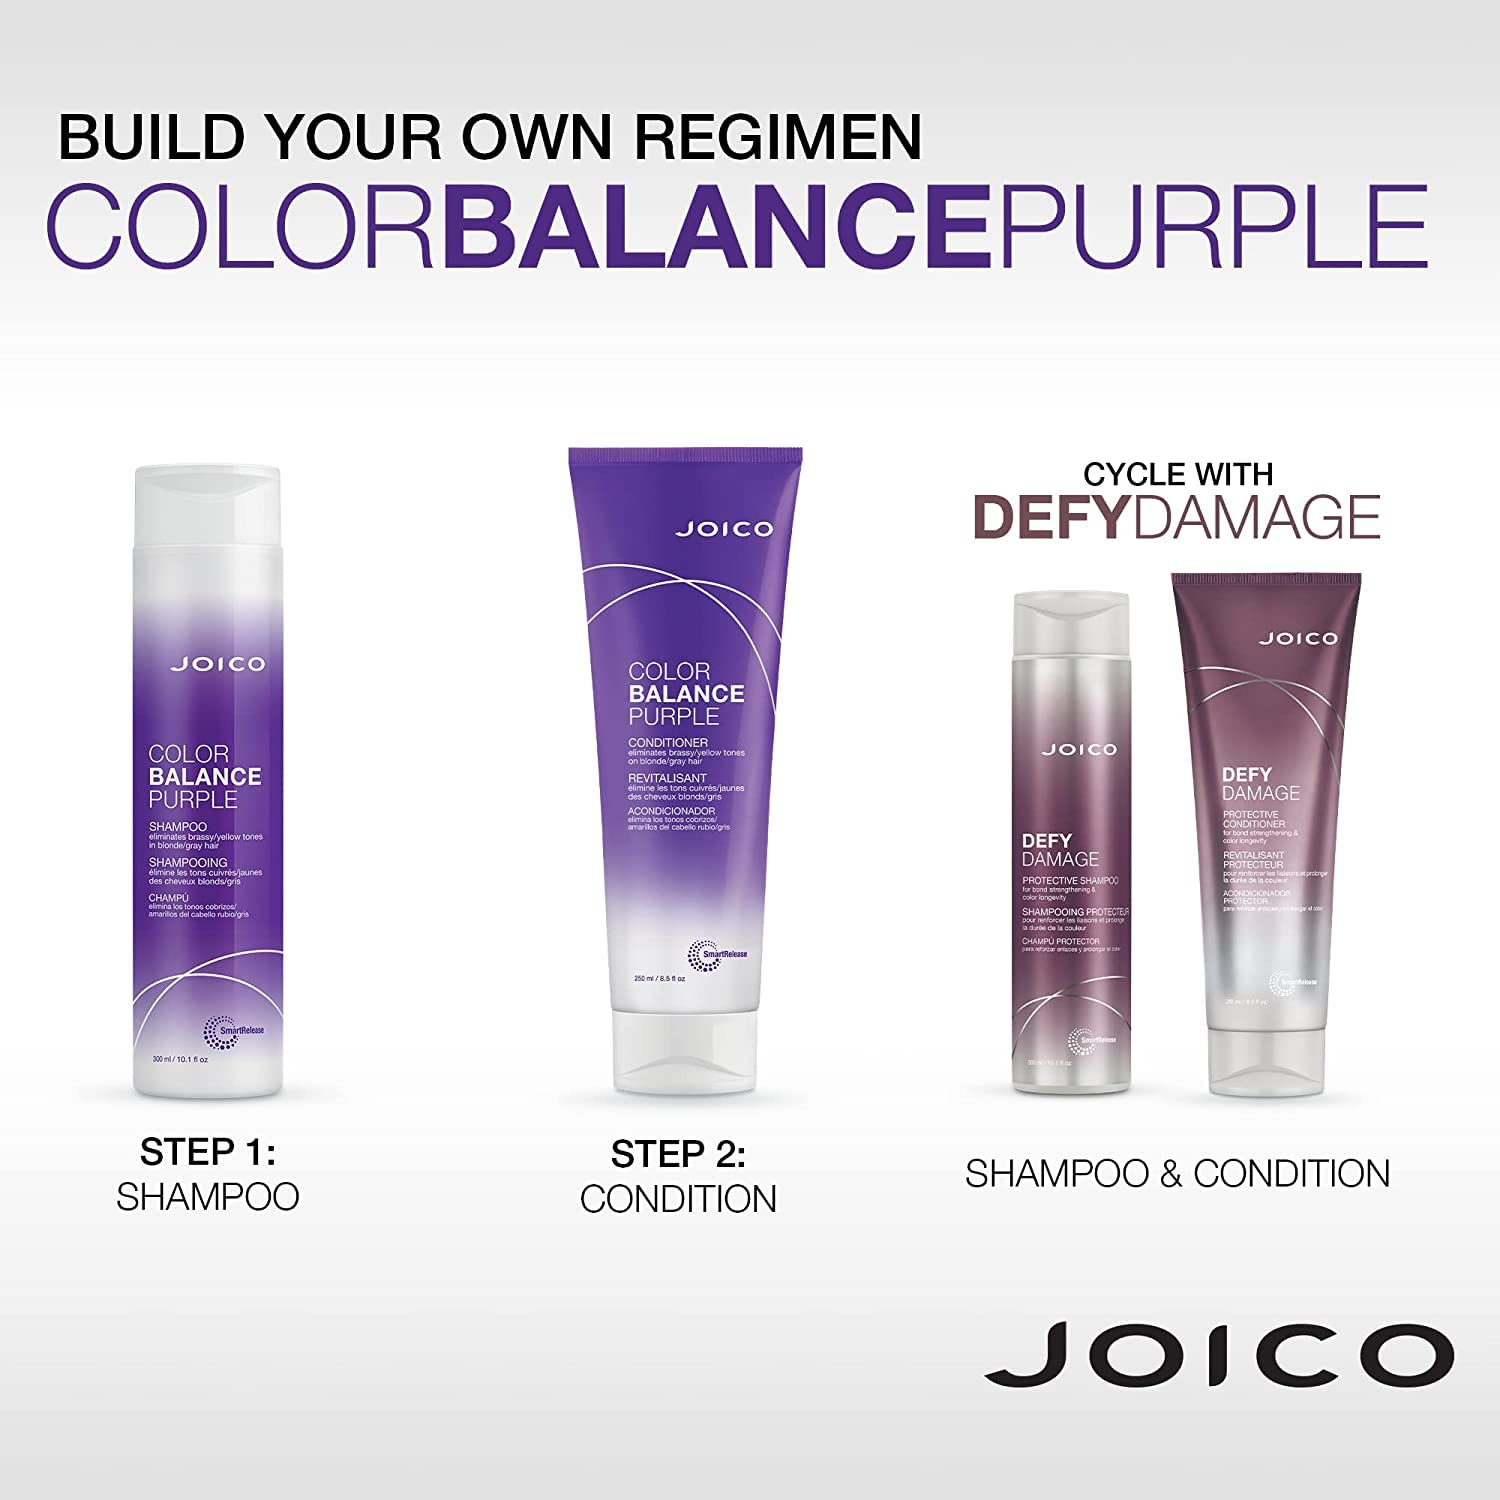 Joico Color Balance Purple Shampoo & Conditioner Set, Eliminate Brassy and Yellow tones, for Cool Blonde or Gray Hair